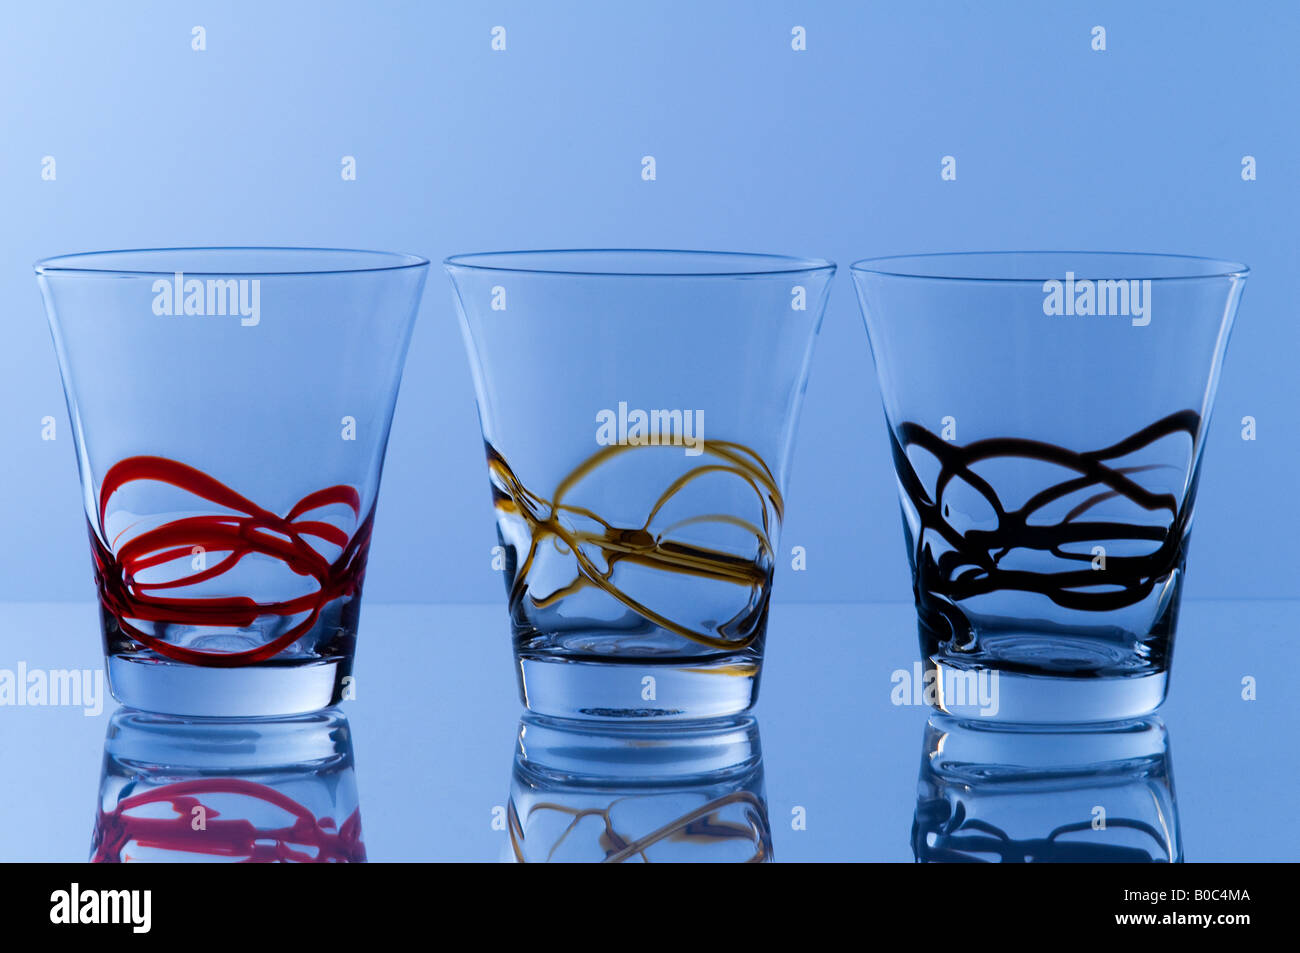 some glasses decorated on a colored surface Stock Photo